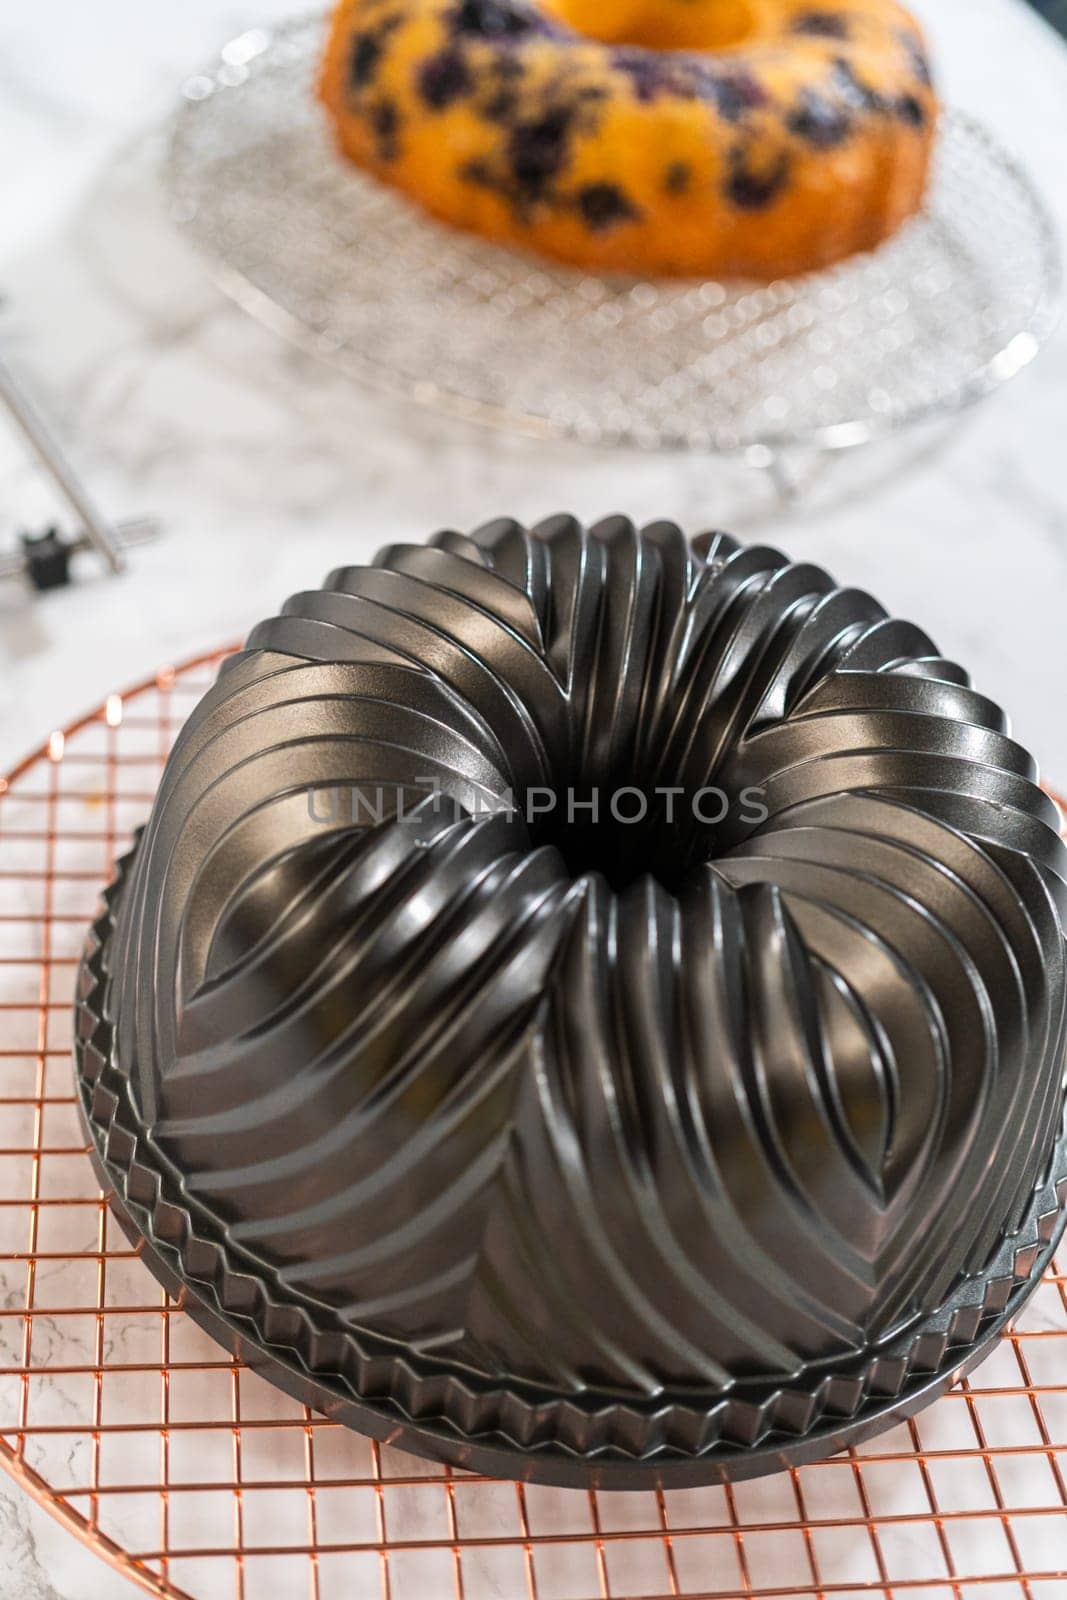 The artful extraction of the freshly baked bundt cake from its mold marks the exciting conclusion of the baking process.